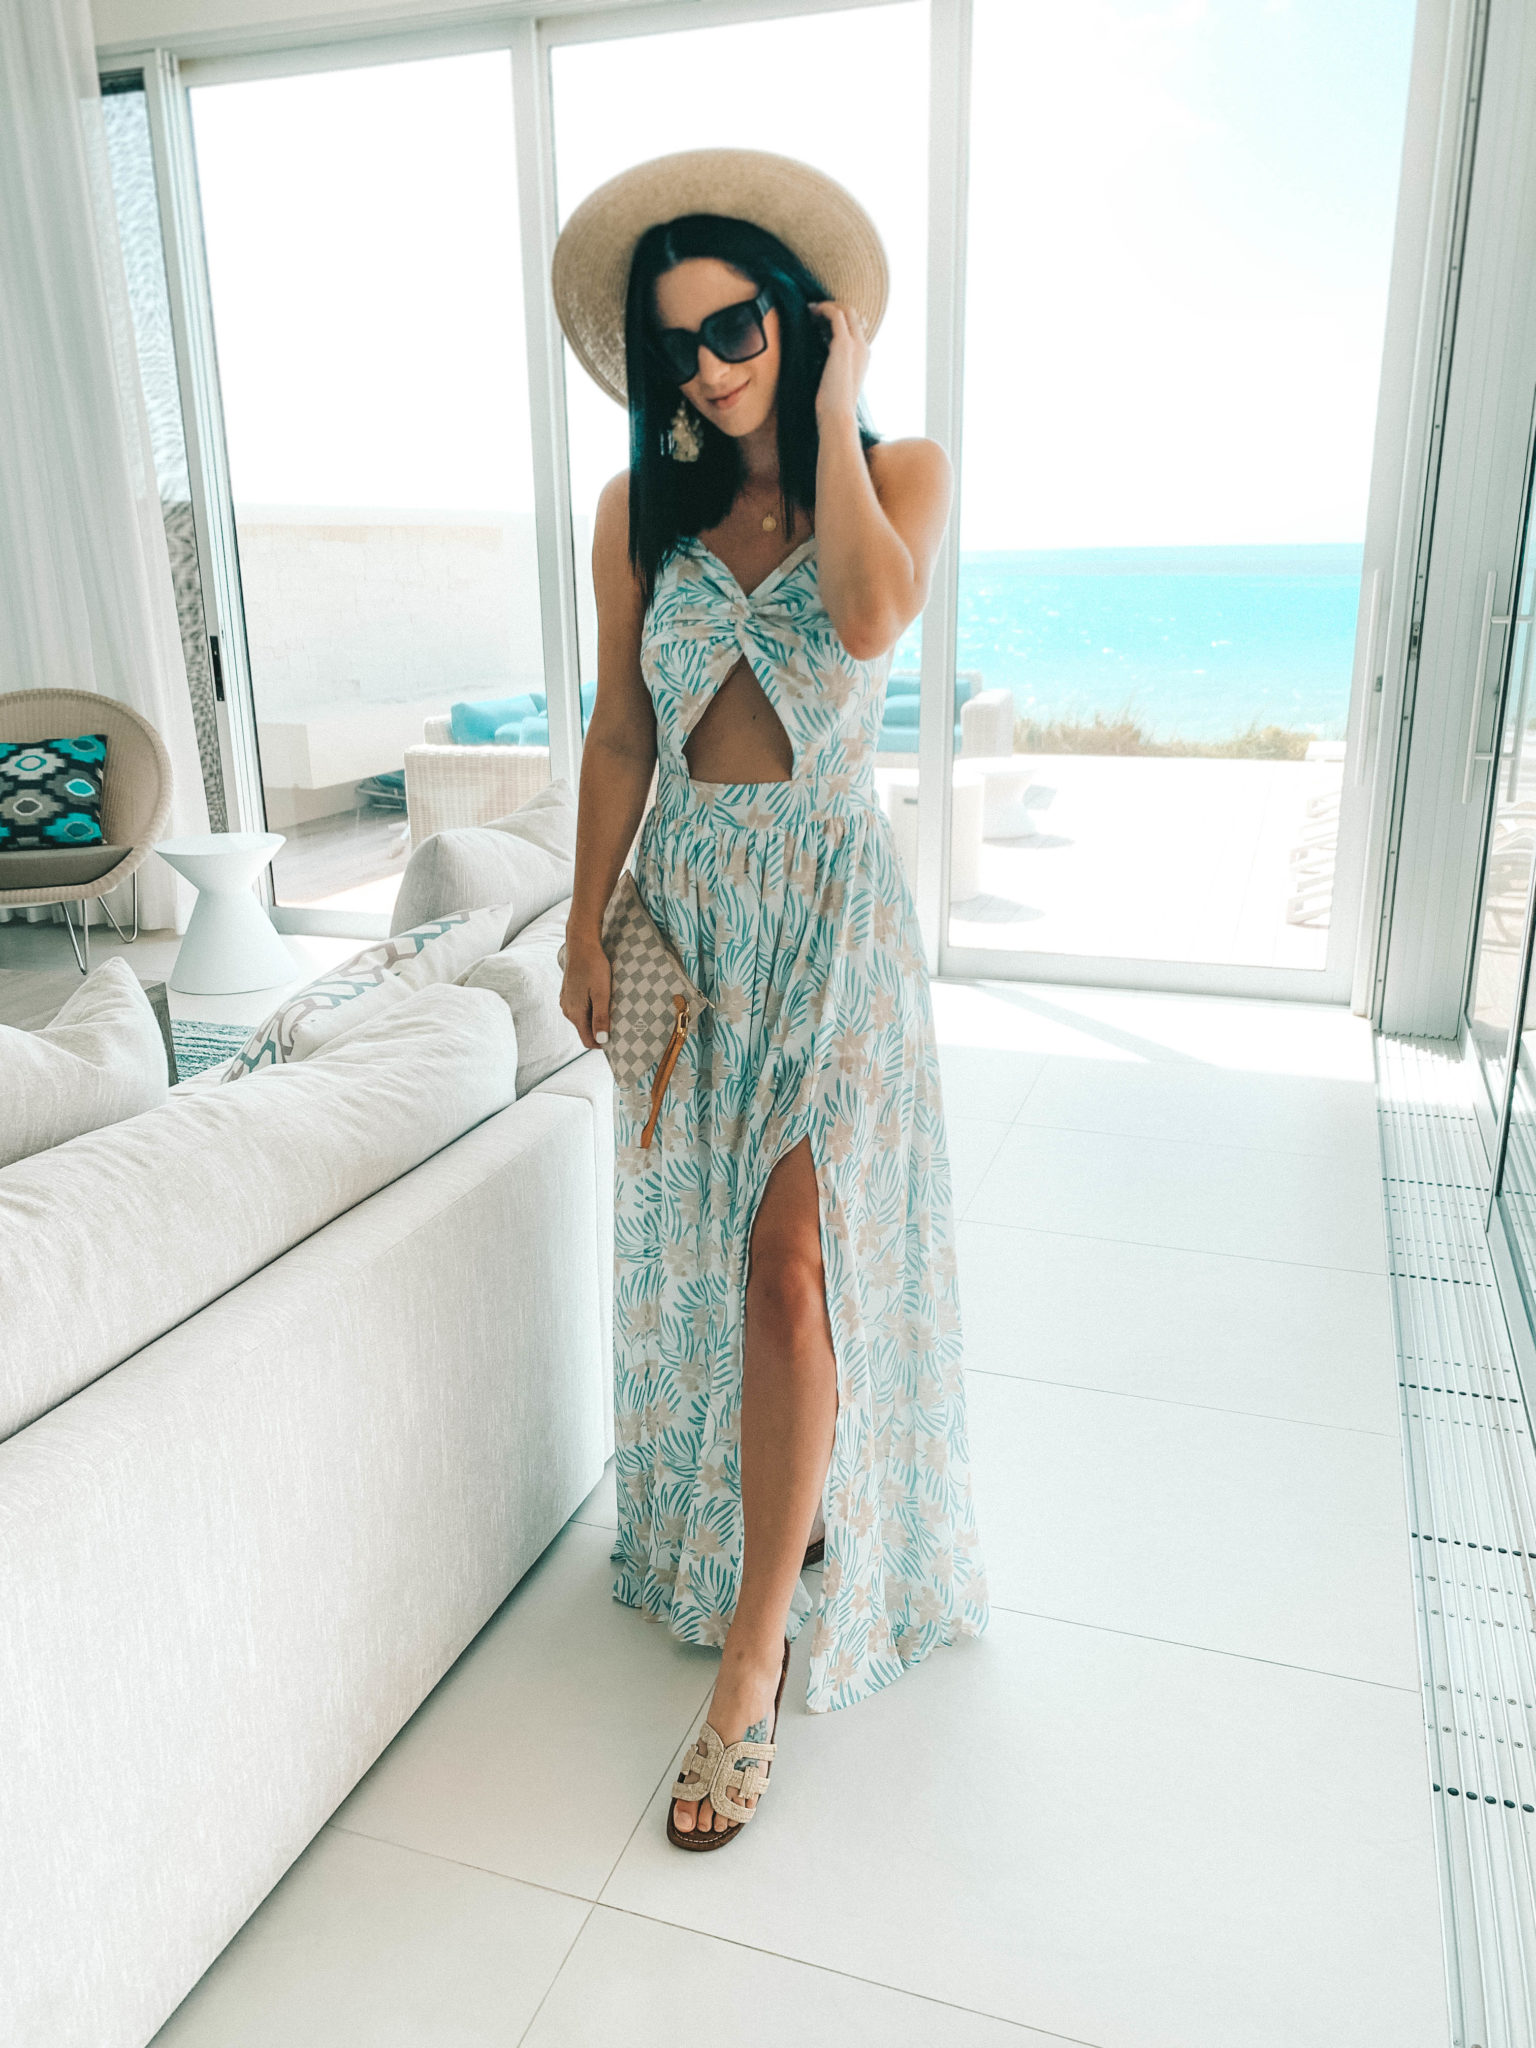 Amaryllis Apparel Abroad Turks & Caicos Summer Try-On by popular Austin fashion blog, Dressed to Kill: image of a woman wearing a Amaryllis Apparel Los Cabos Maxi Dress.